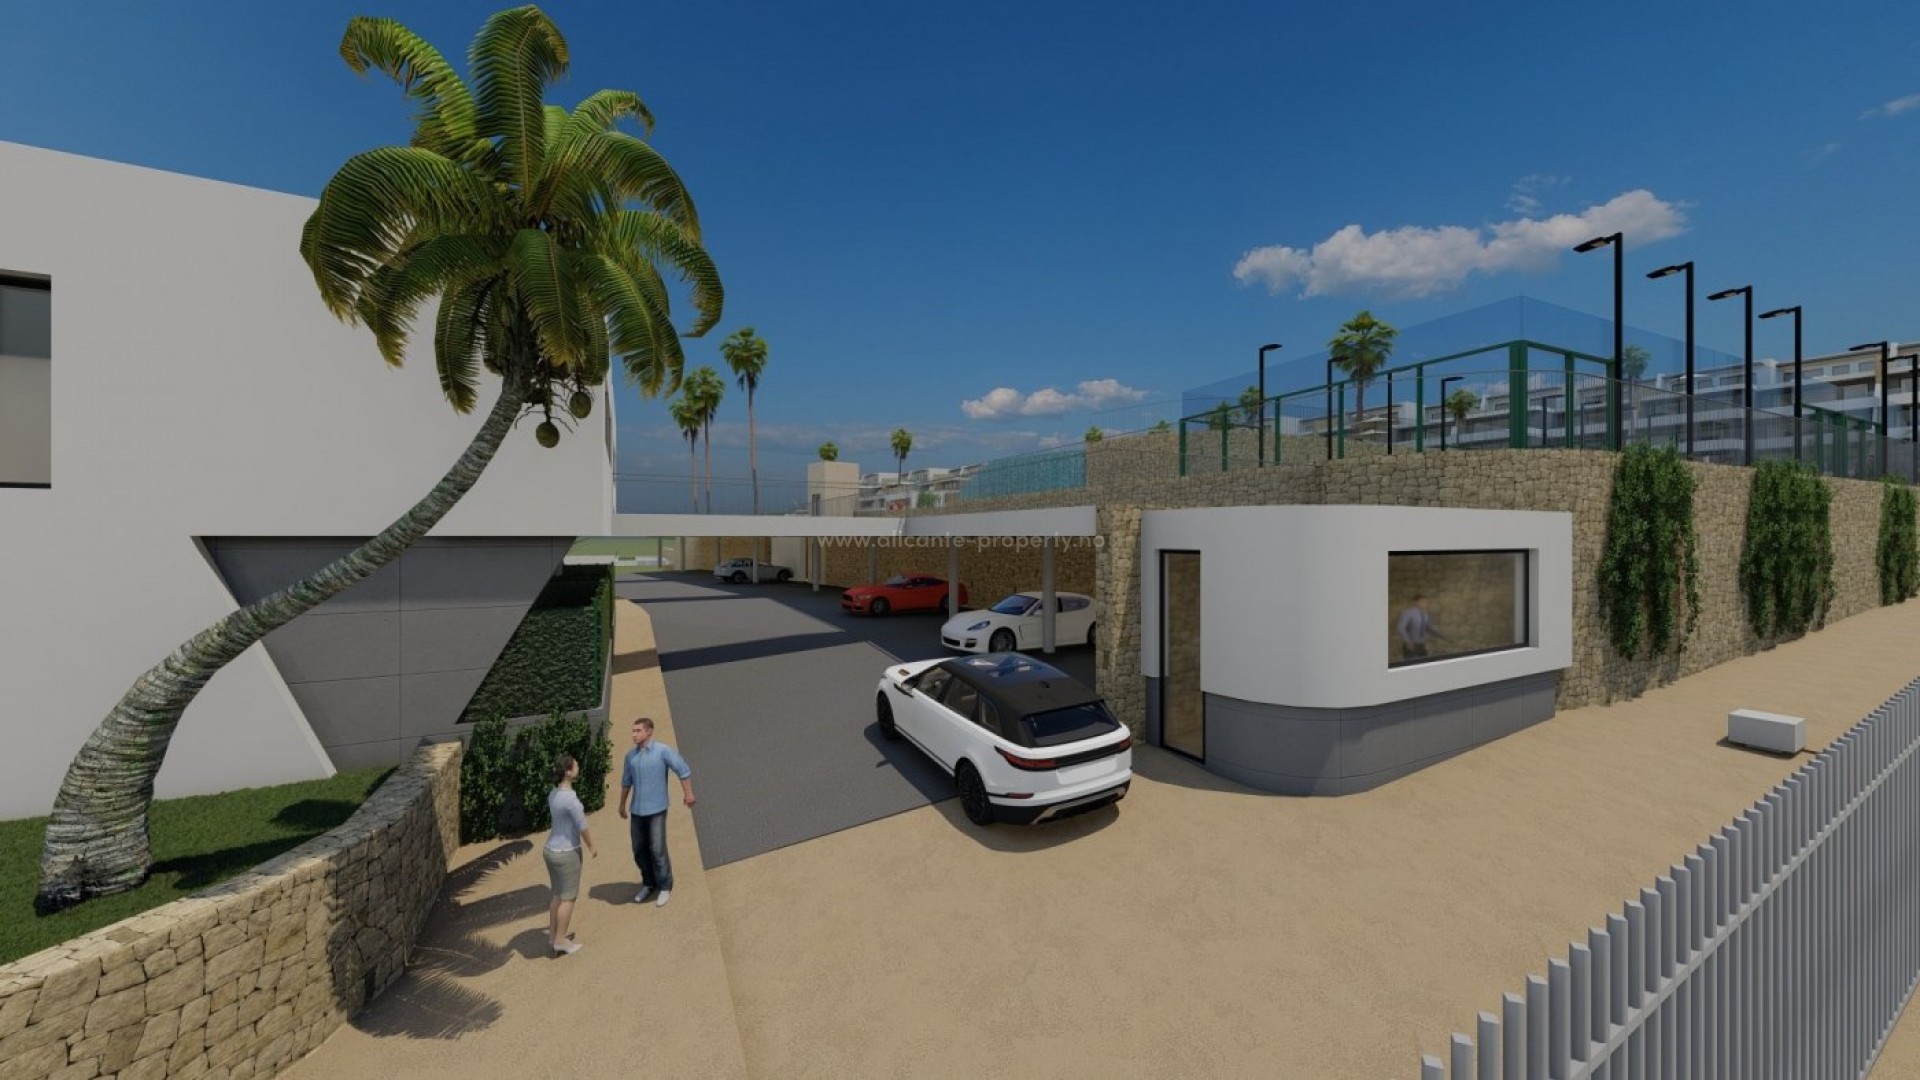 New building with small exclusive flats/bungalows in Camporrosso in Finestrat, 2 bedrooms, 2 bathrooms. Common area with infinity pool, gym, garden, meeting room